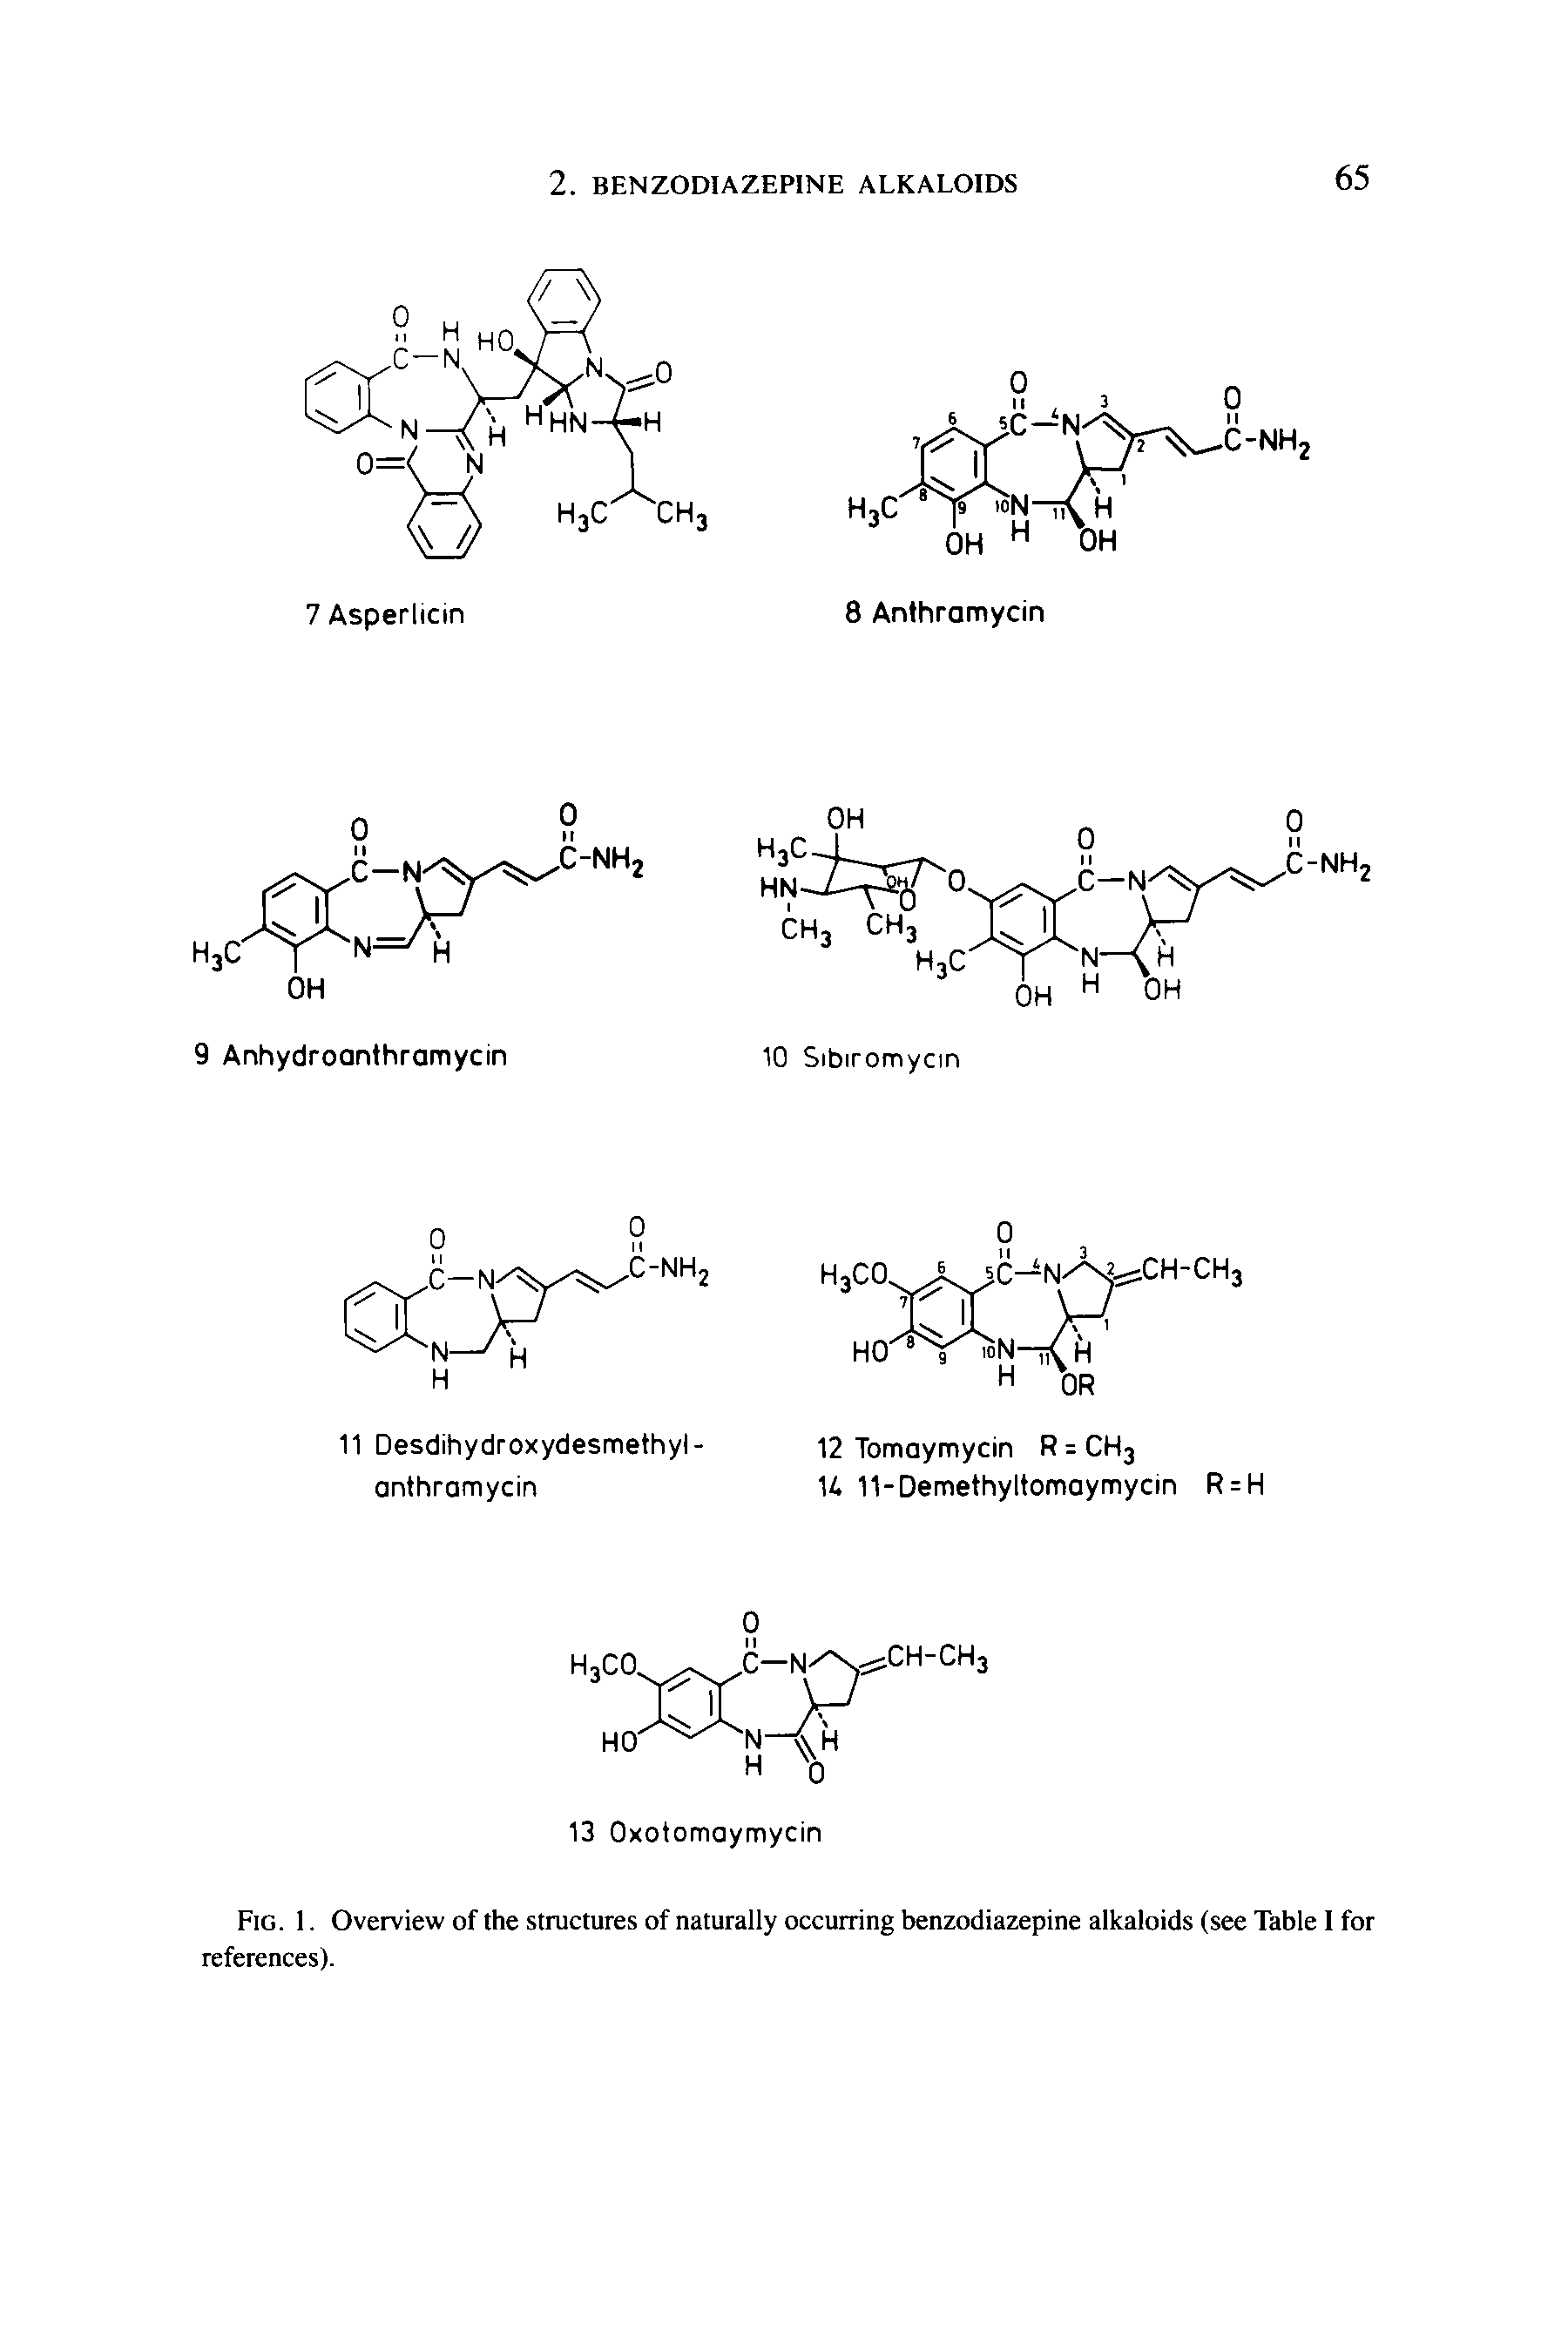 Fig. 1. Overview of the structures of naturally occurring benzodiazepine alkaloids (see Table I for references).